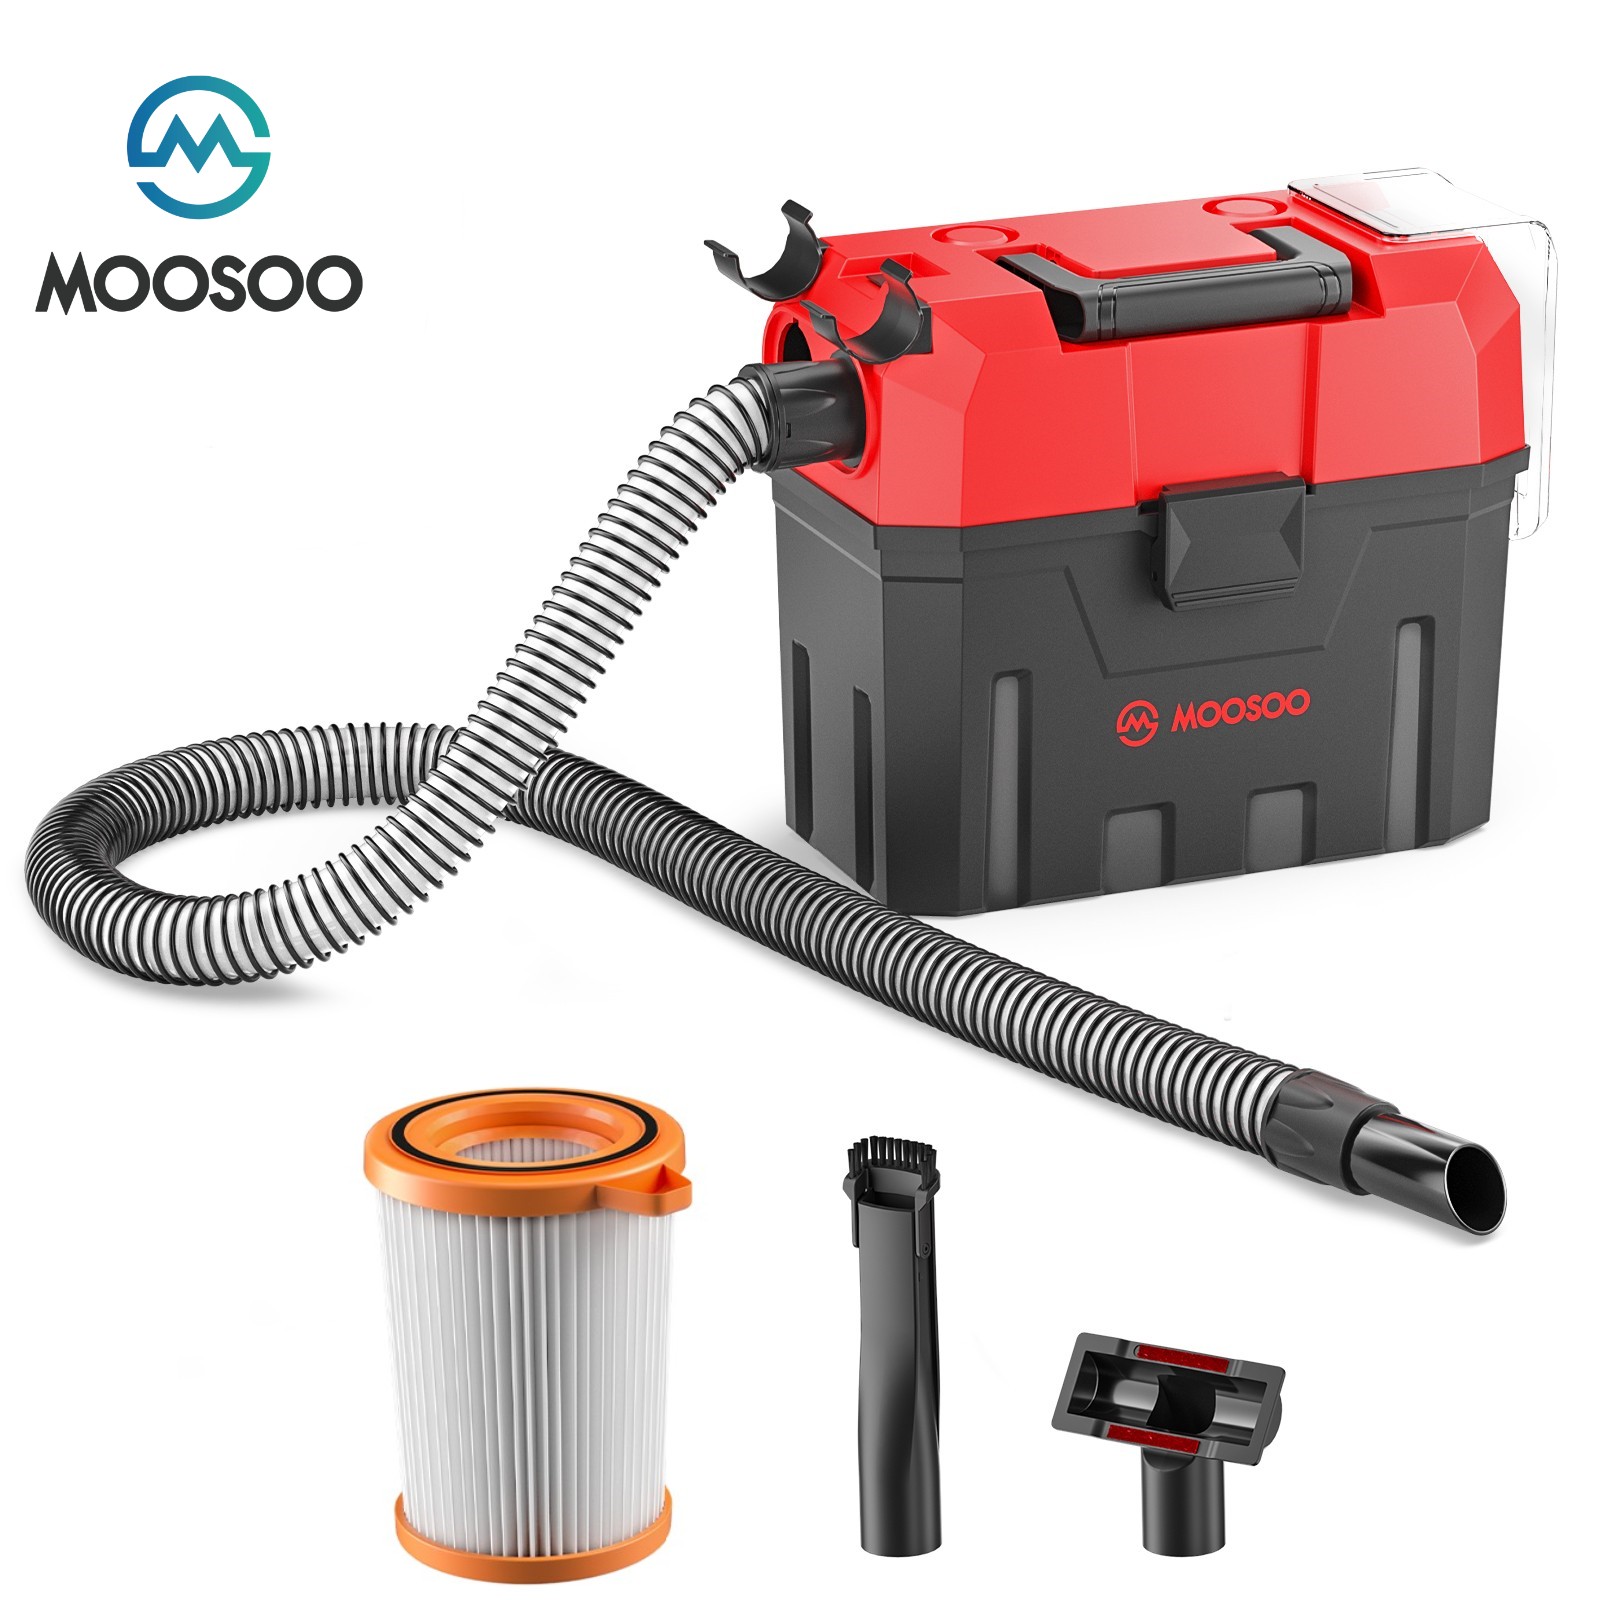 

Moosoo L7 Small Cordless Shop Vac, Portable Shop Vacuum Wet And Dry With Blower For Home/garage/car